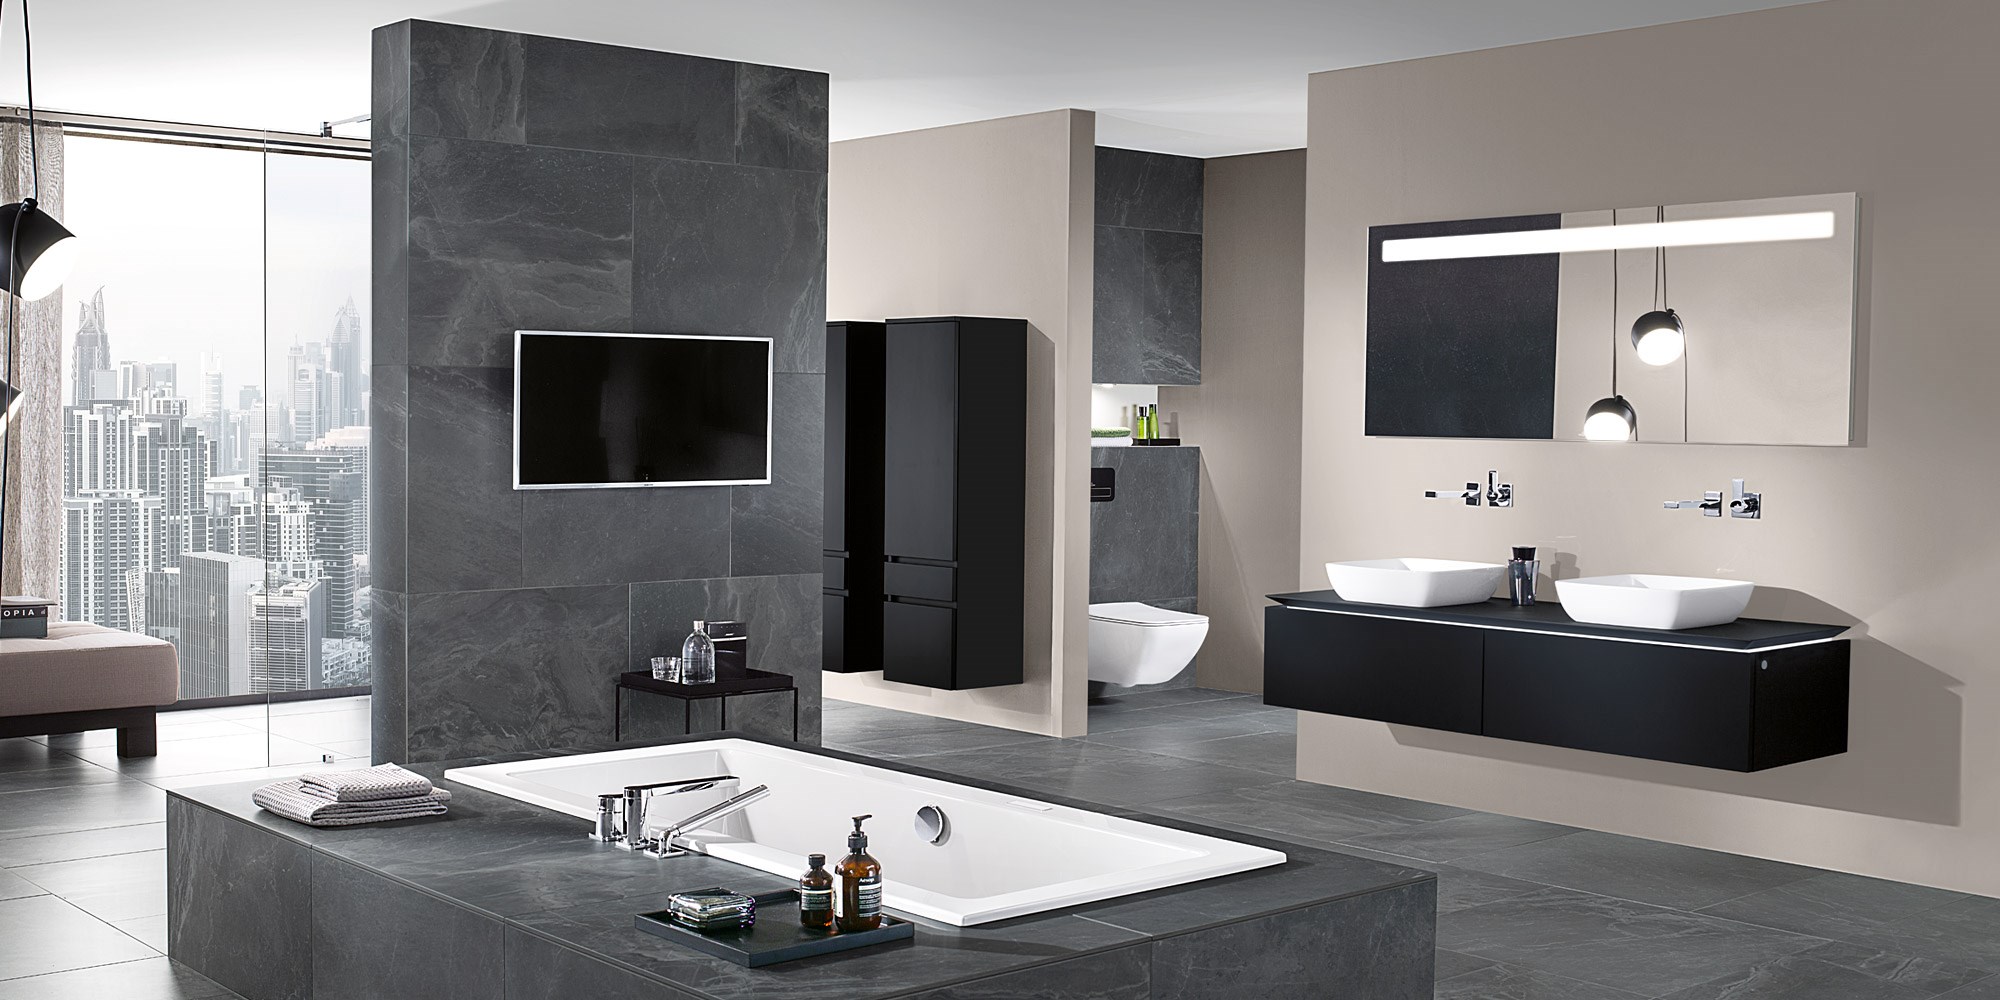 NATURAL STONE TILES from Villeroy & Boch